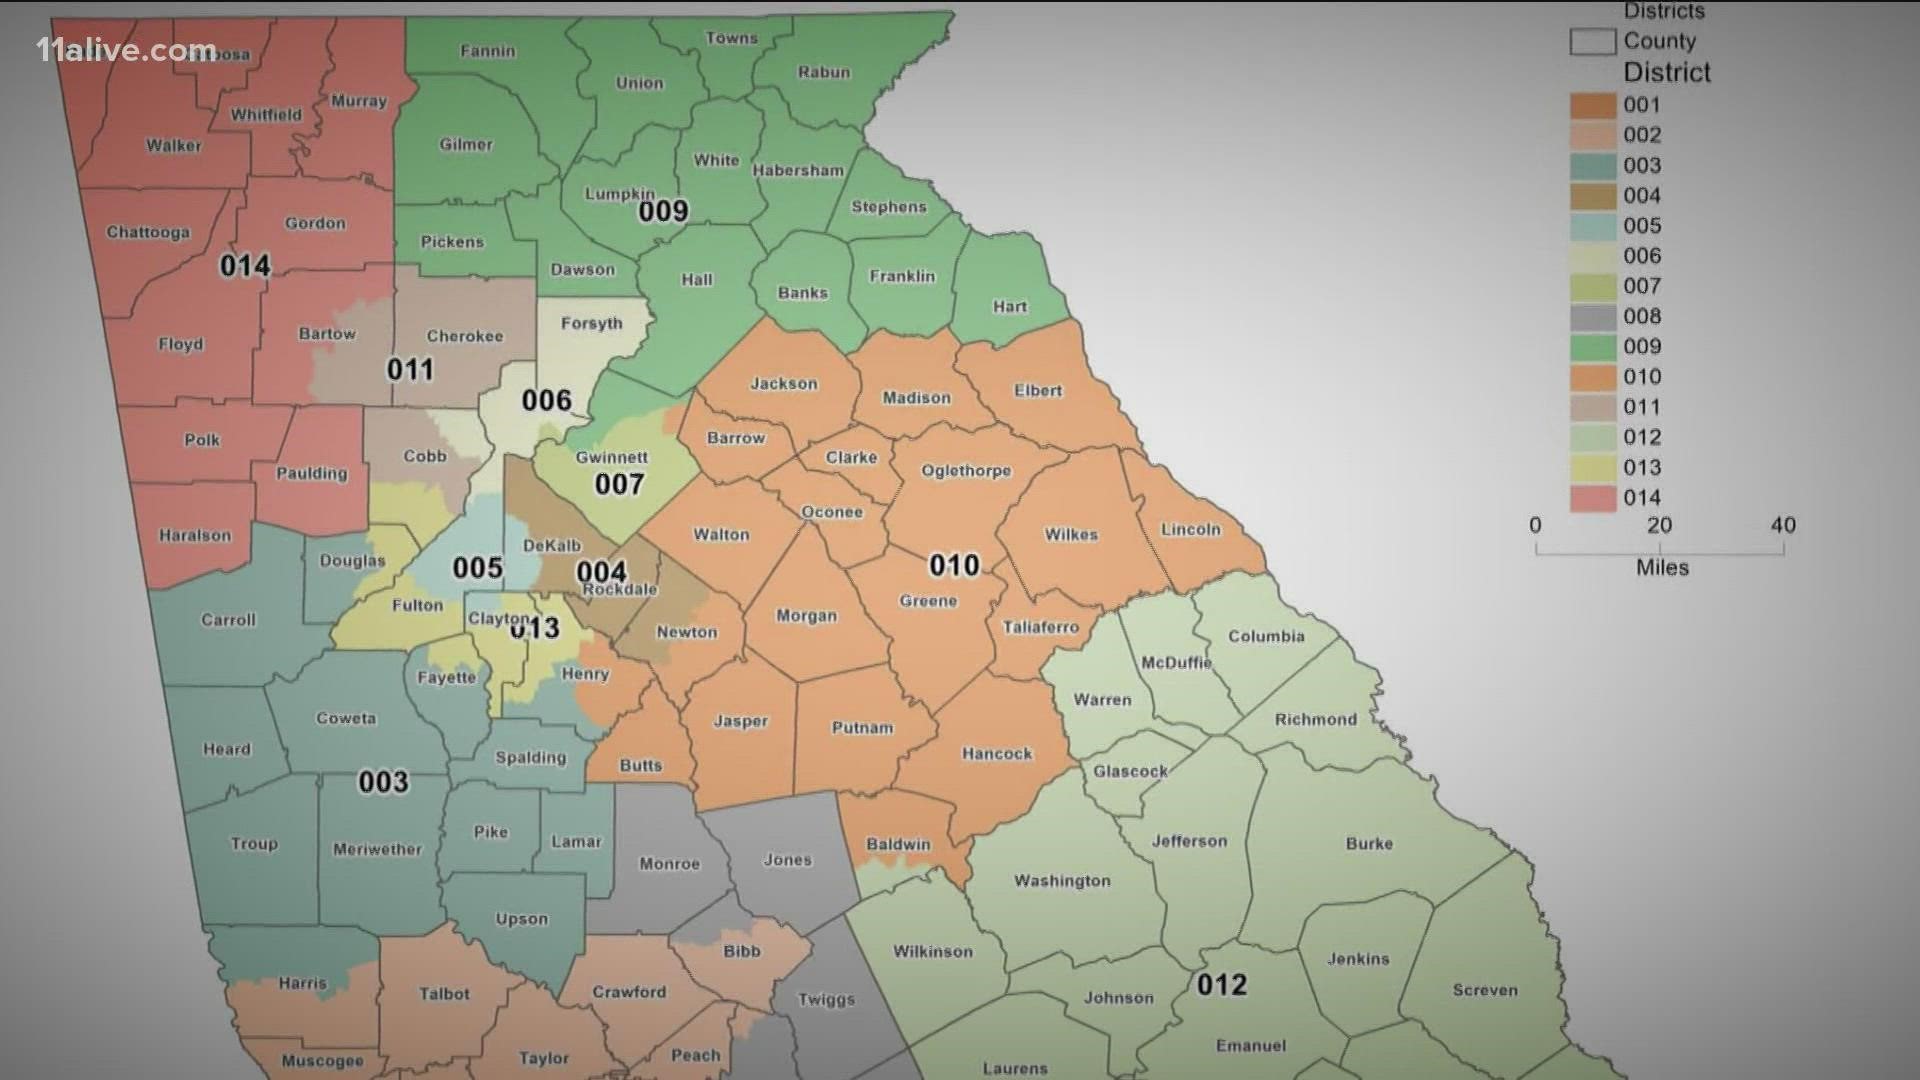 We're getting out first look at what Georgia's congressional districts could look like in the next decade.